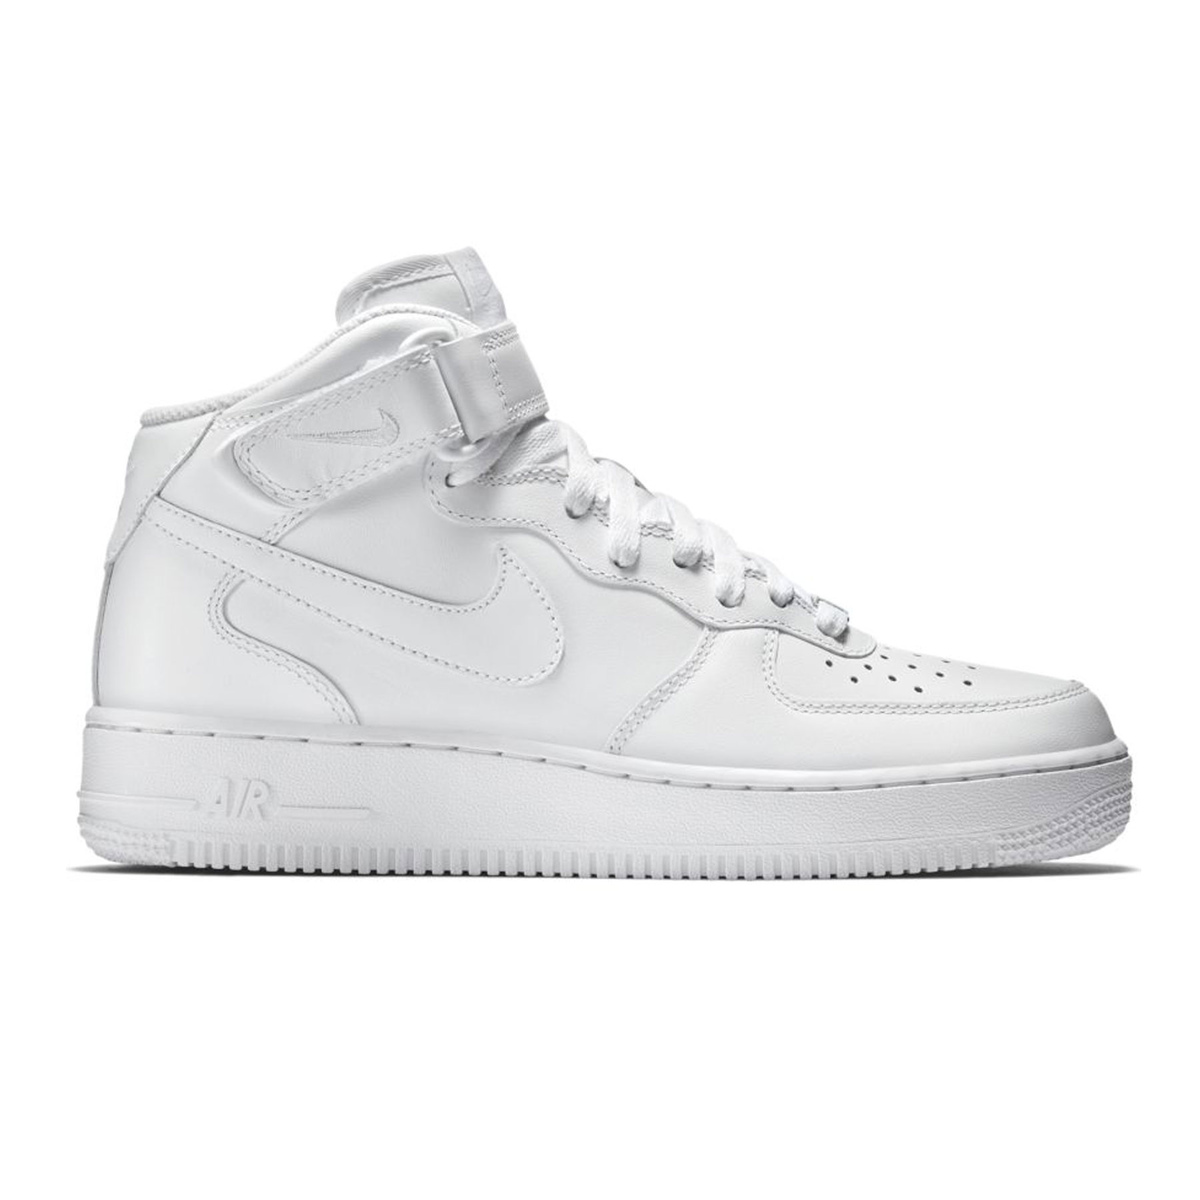 AIR FORCE 1 MID bianche